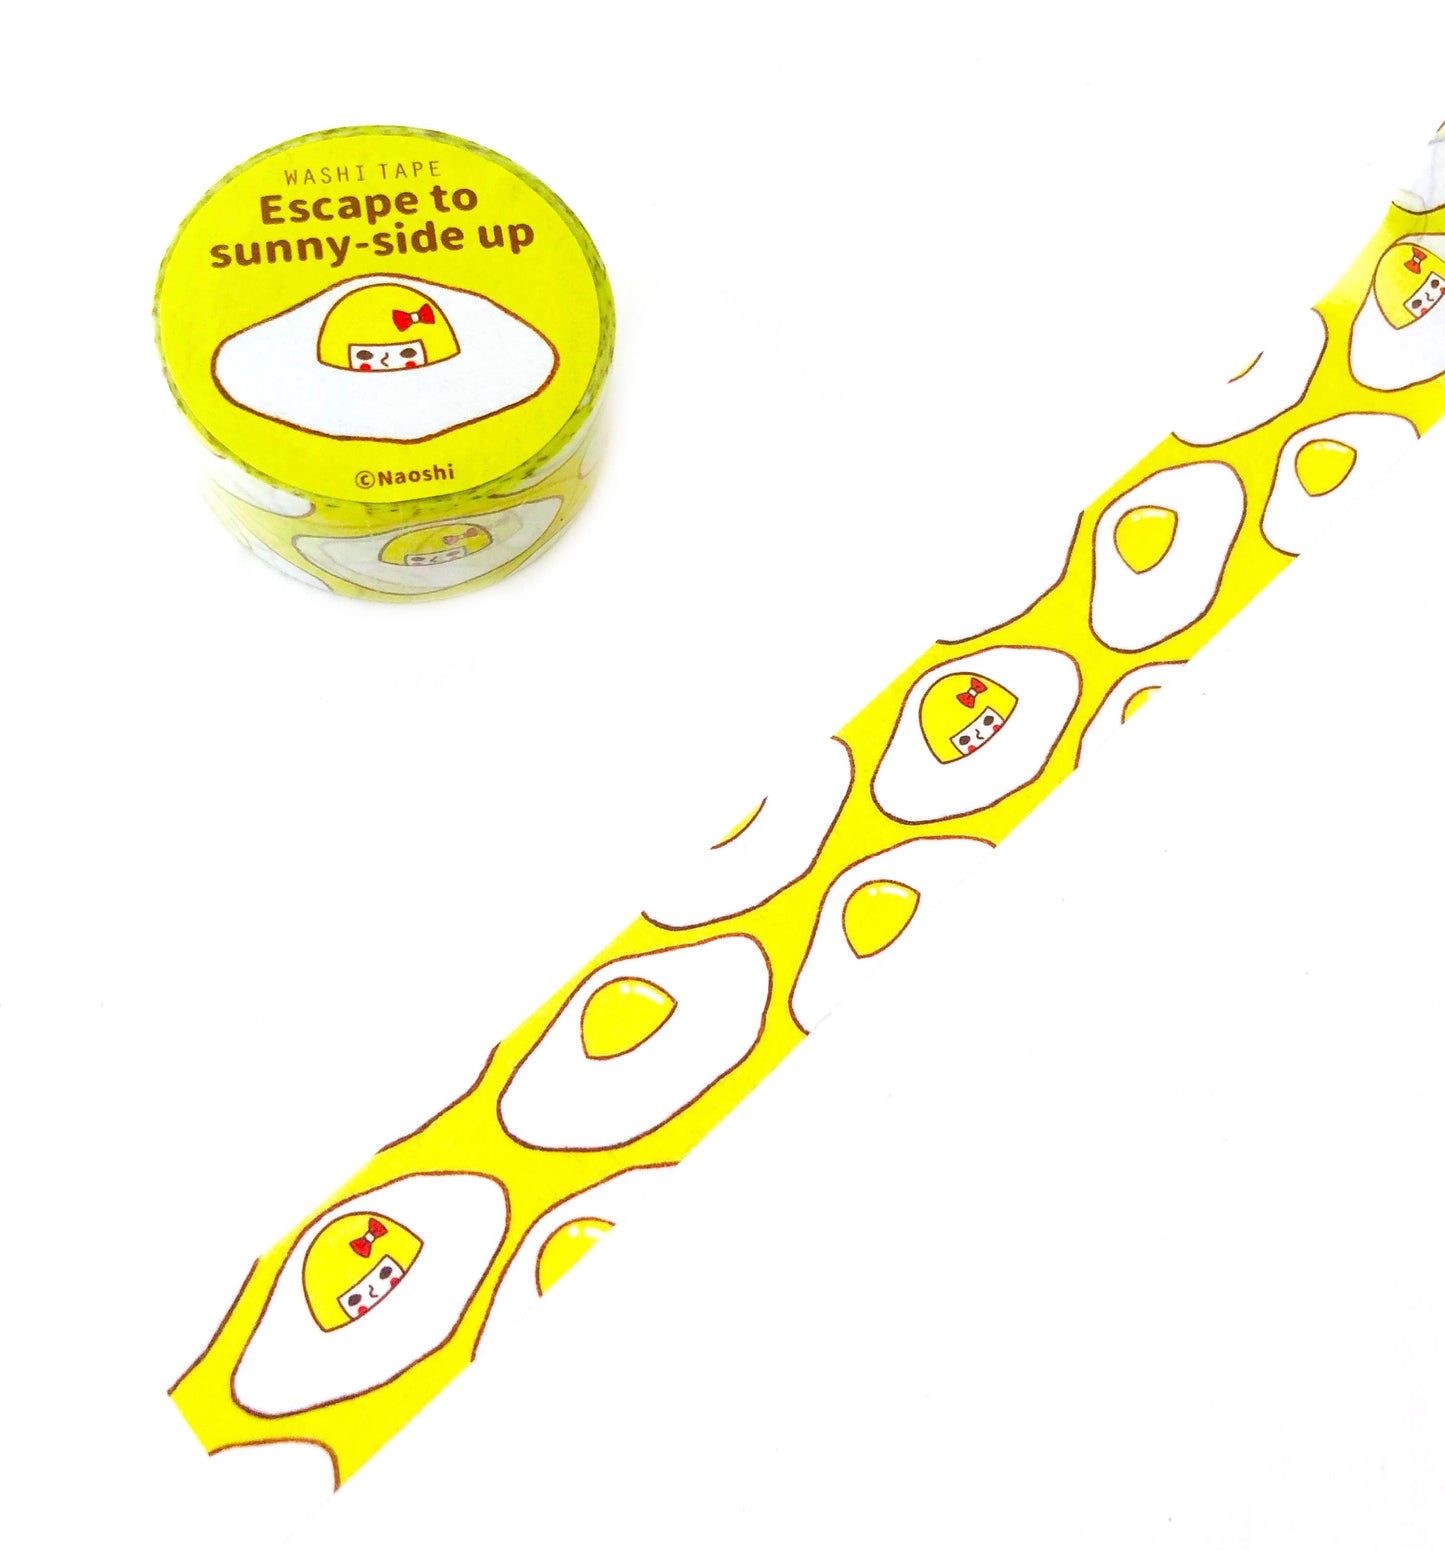 【Washi Tape】Escape to sunny-side up